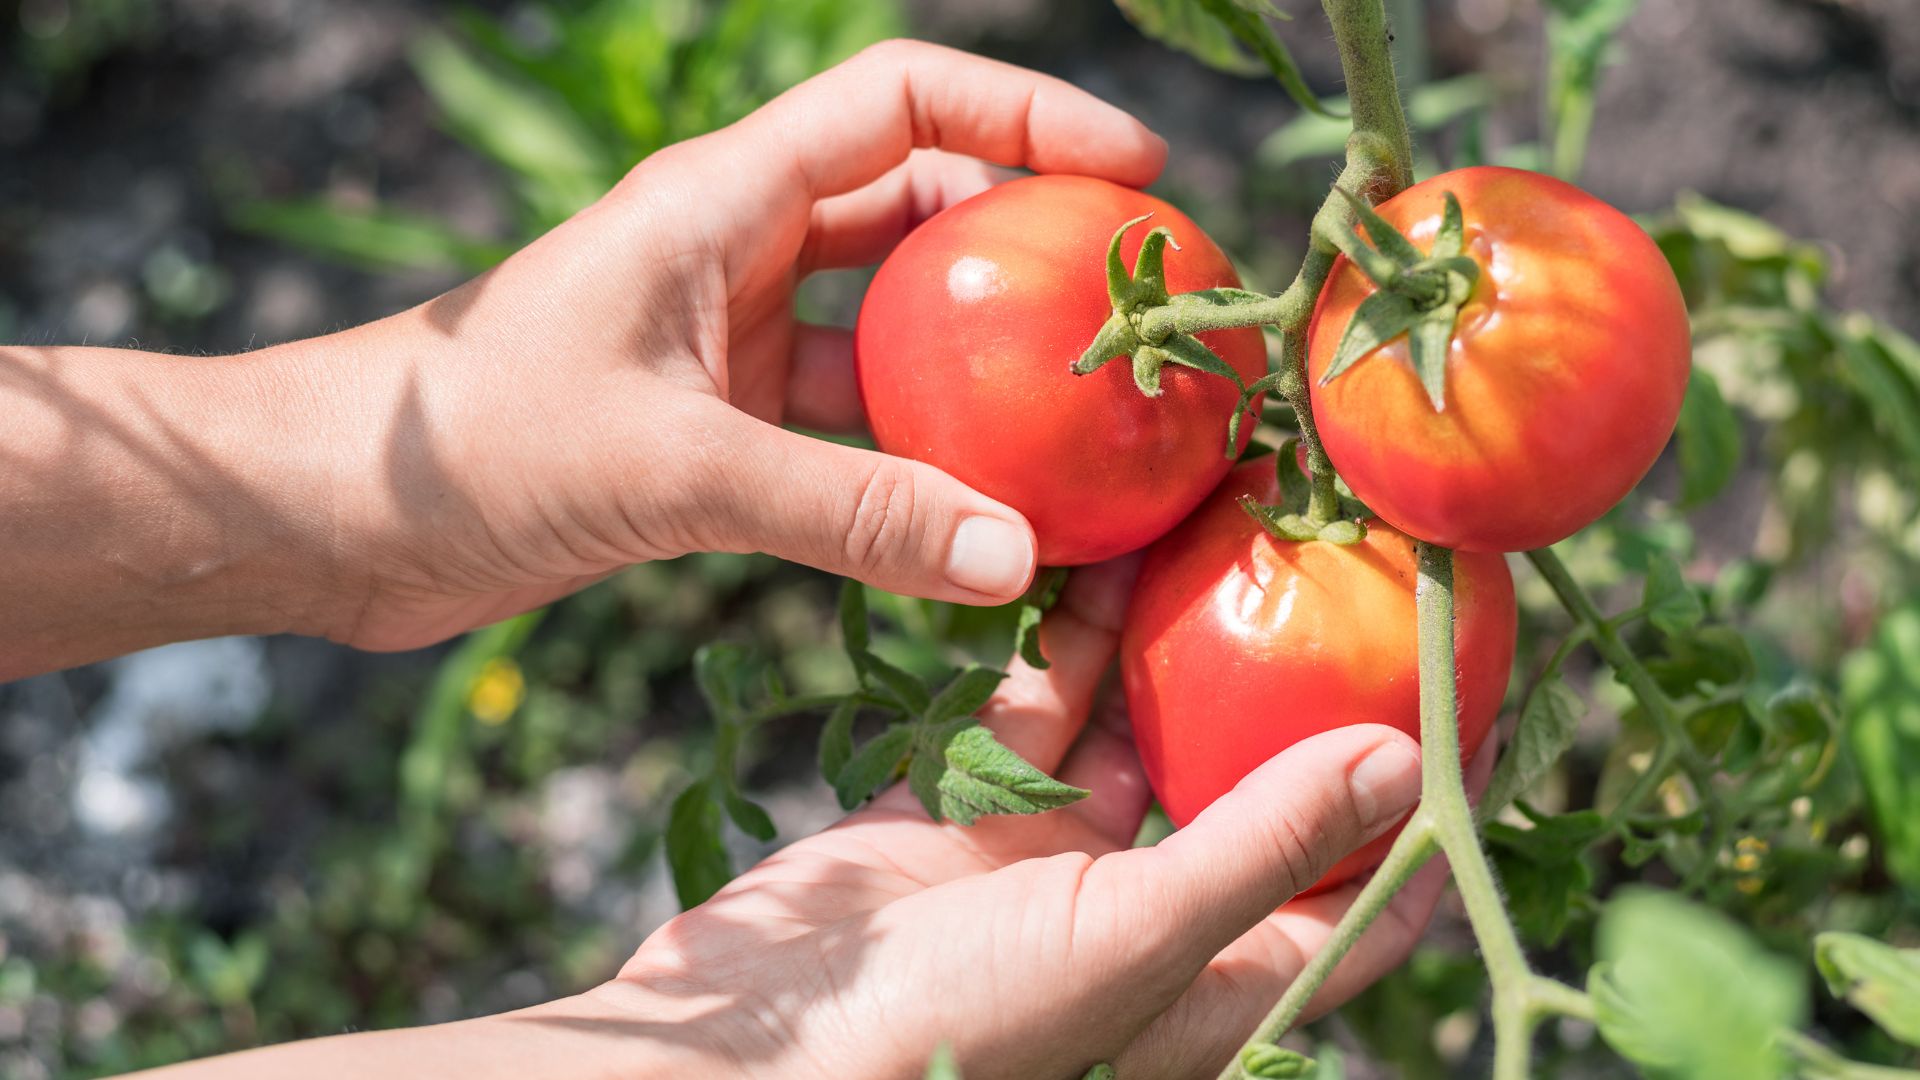 7 Tips For Harvesting Tomatoes Like A Pro